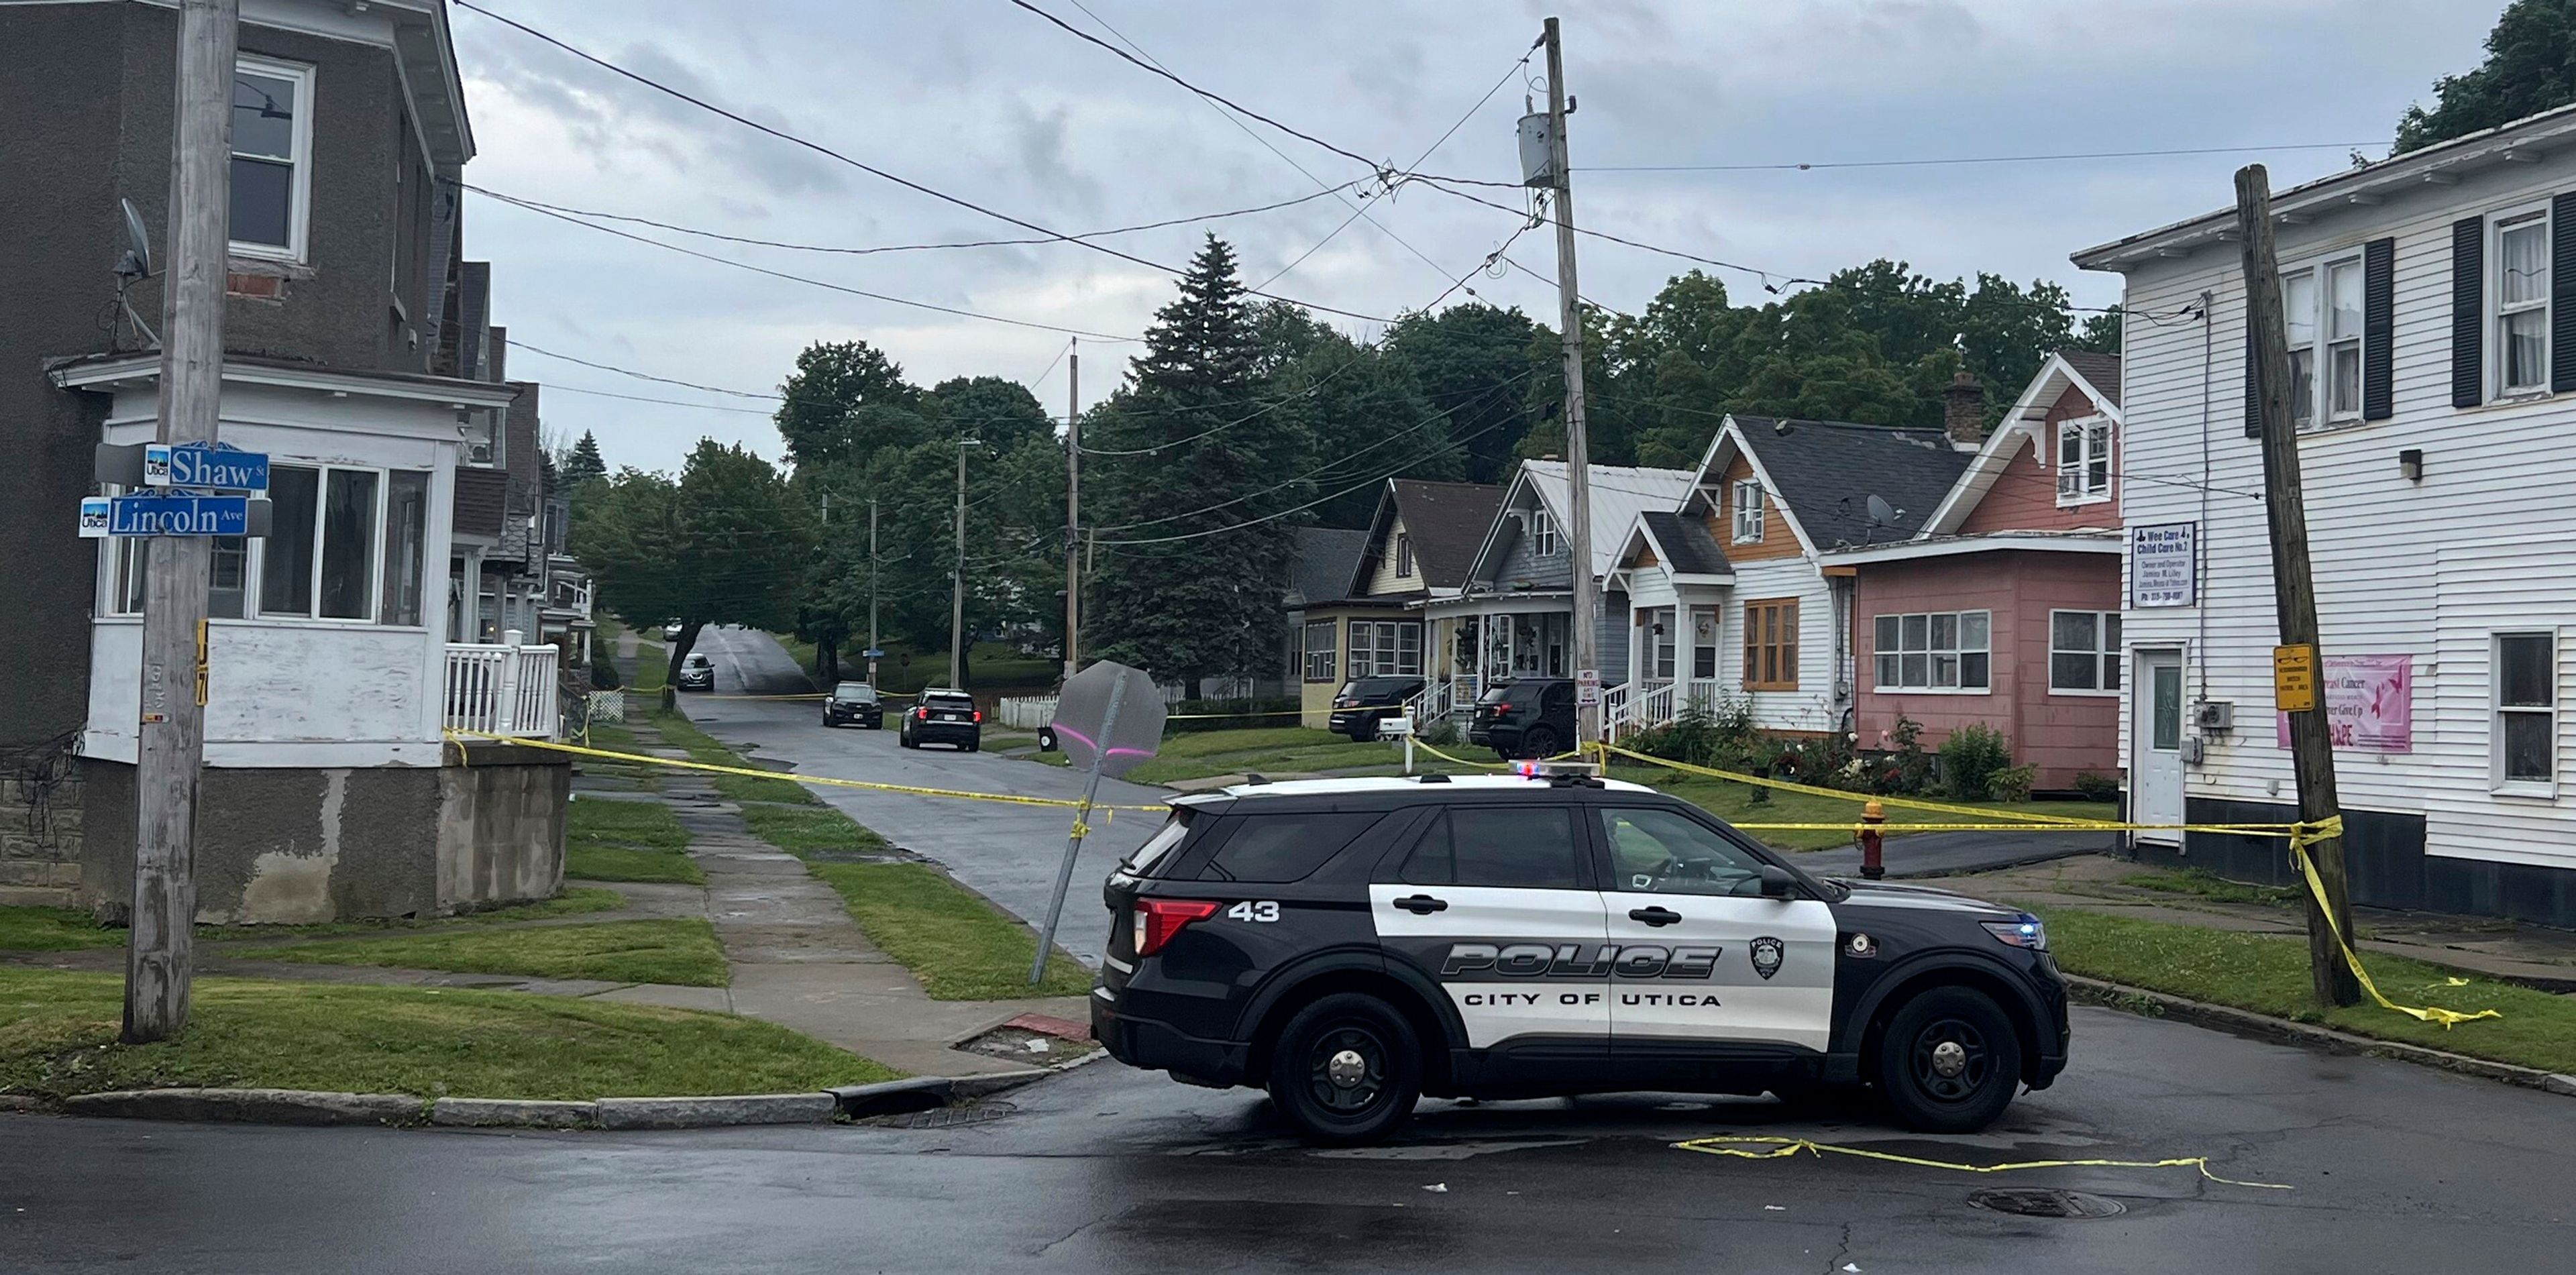 Teen shot and killed by police in upstate New York, authorities say